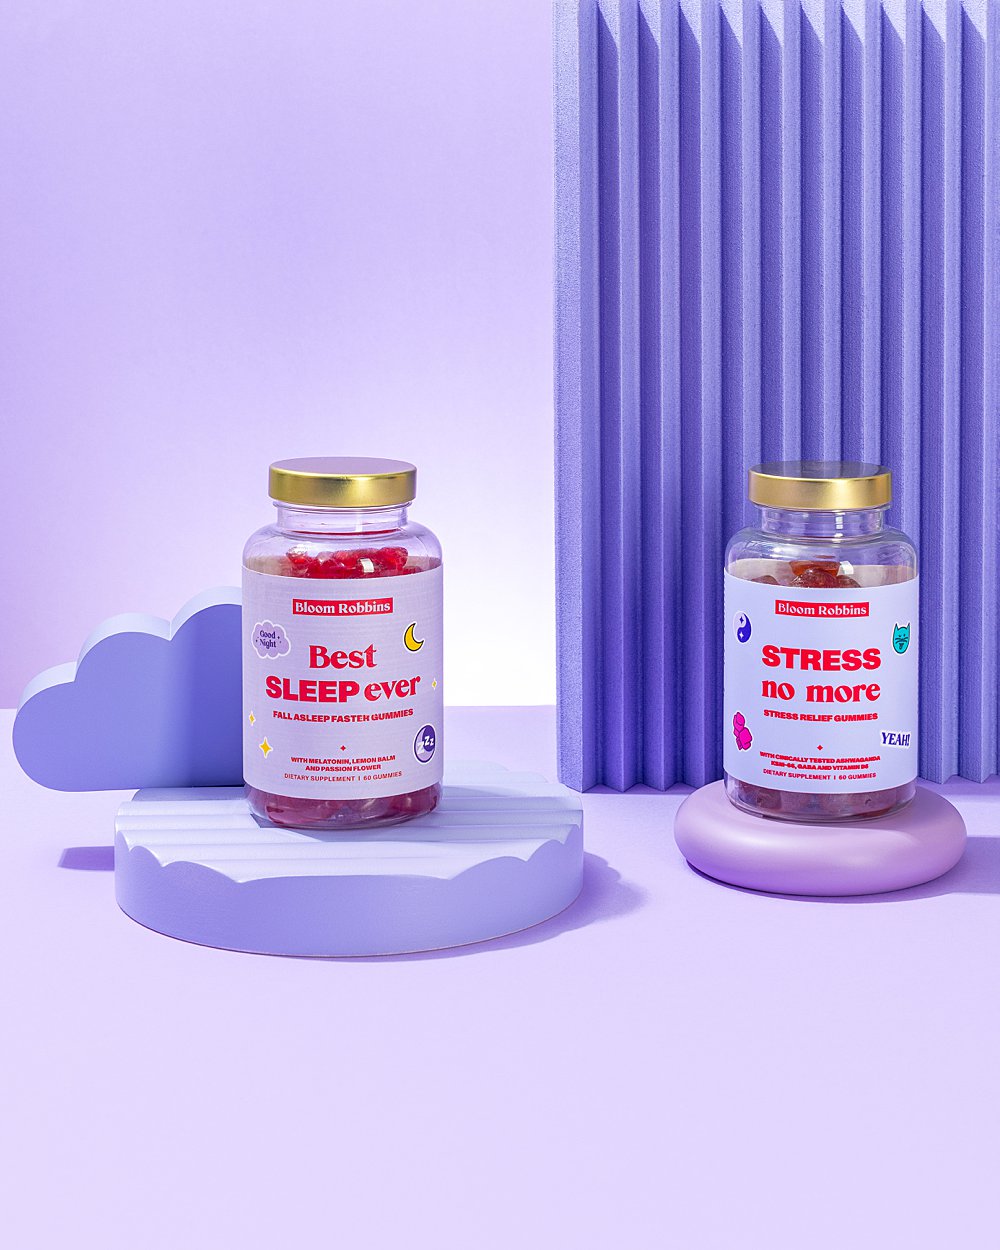 Colourful stills content creation for Bloom Robbins vitamins. Styled ...